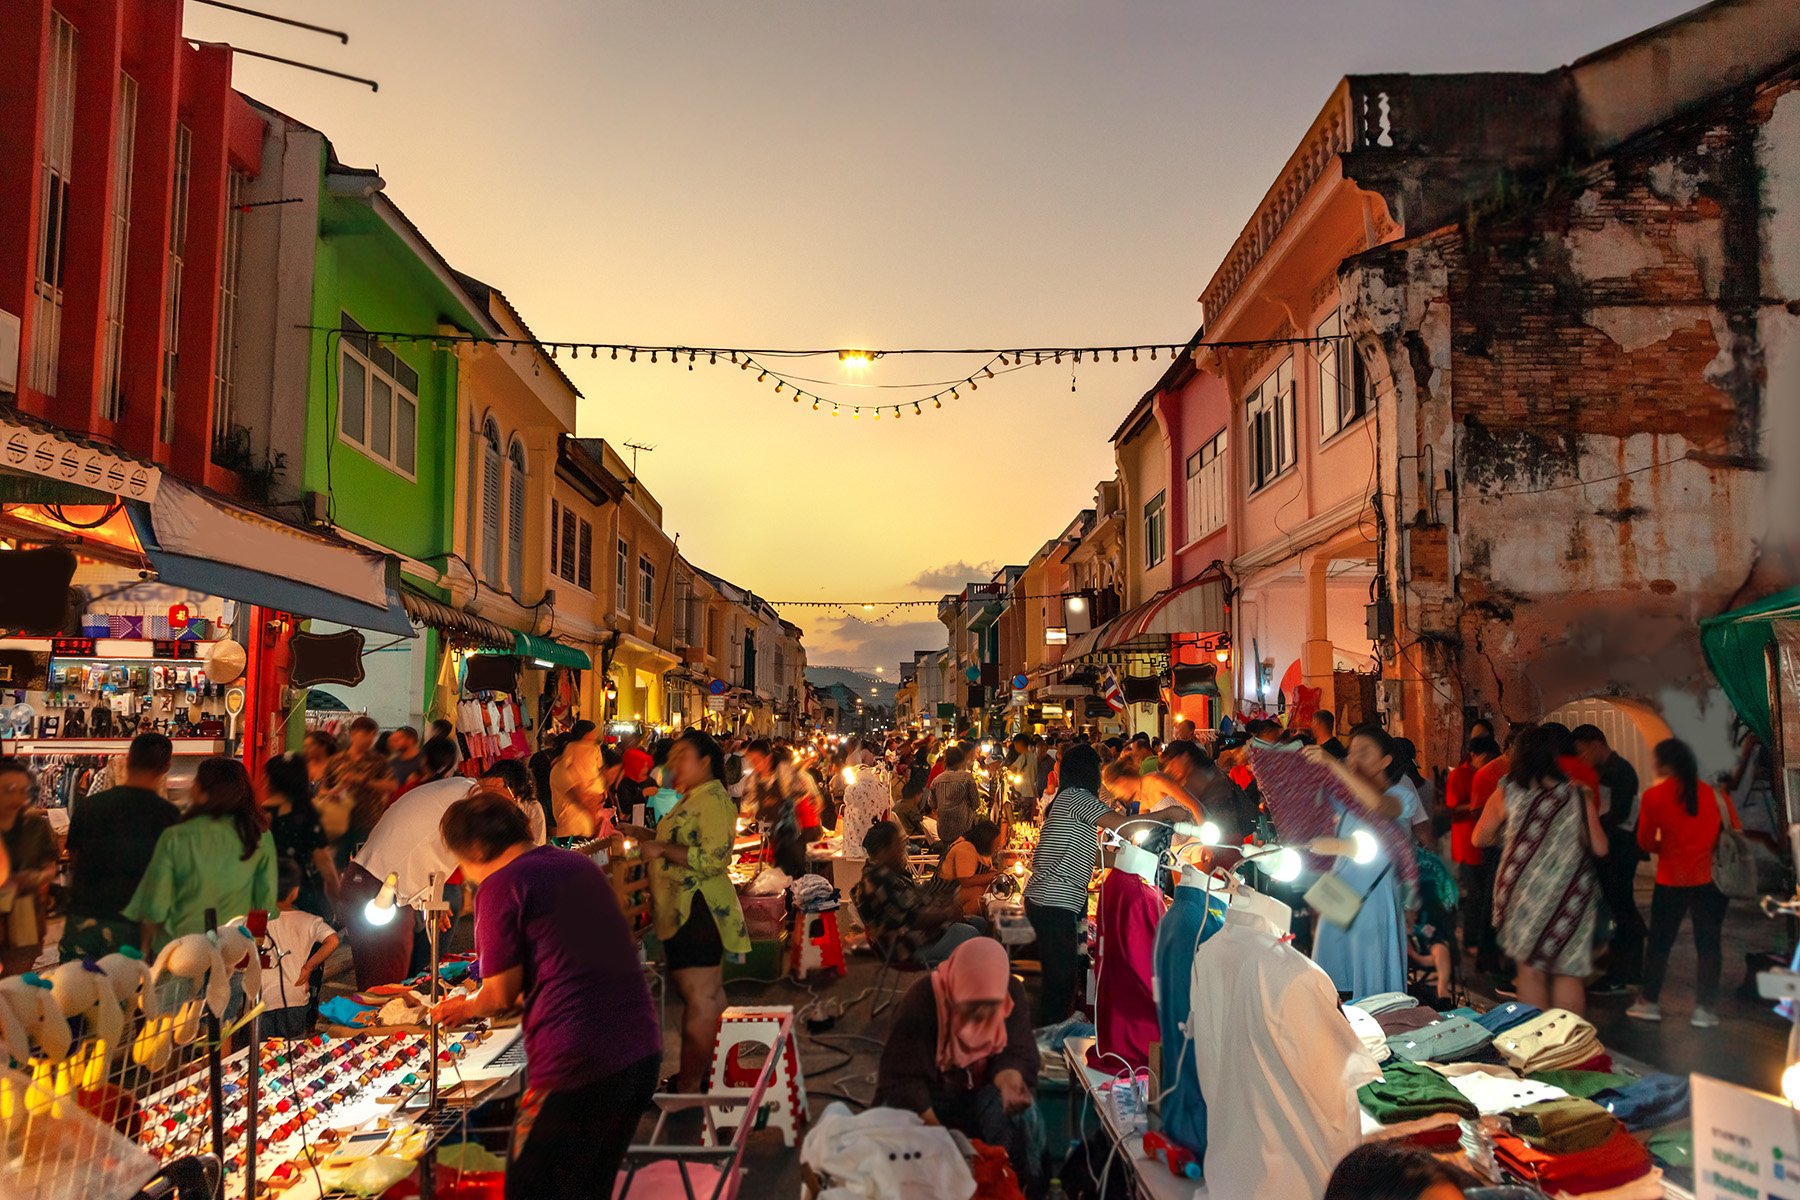 People at a night market in Phuket, Thailand, buying and selling



